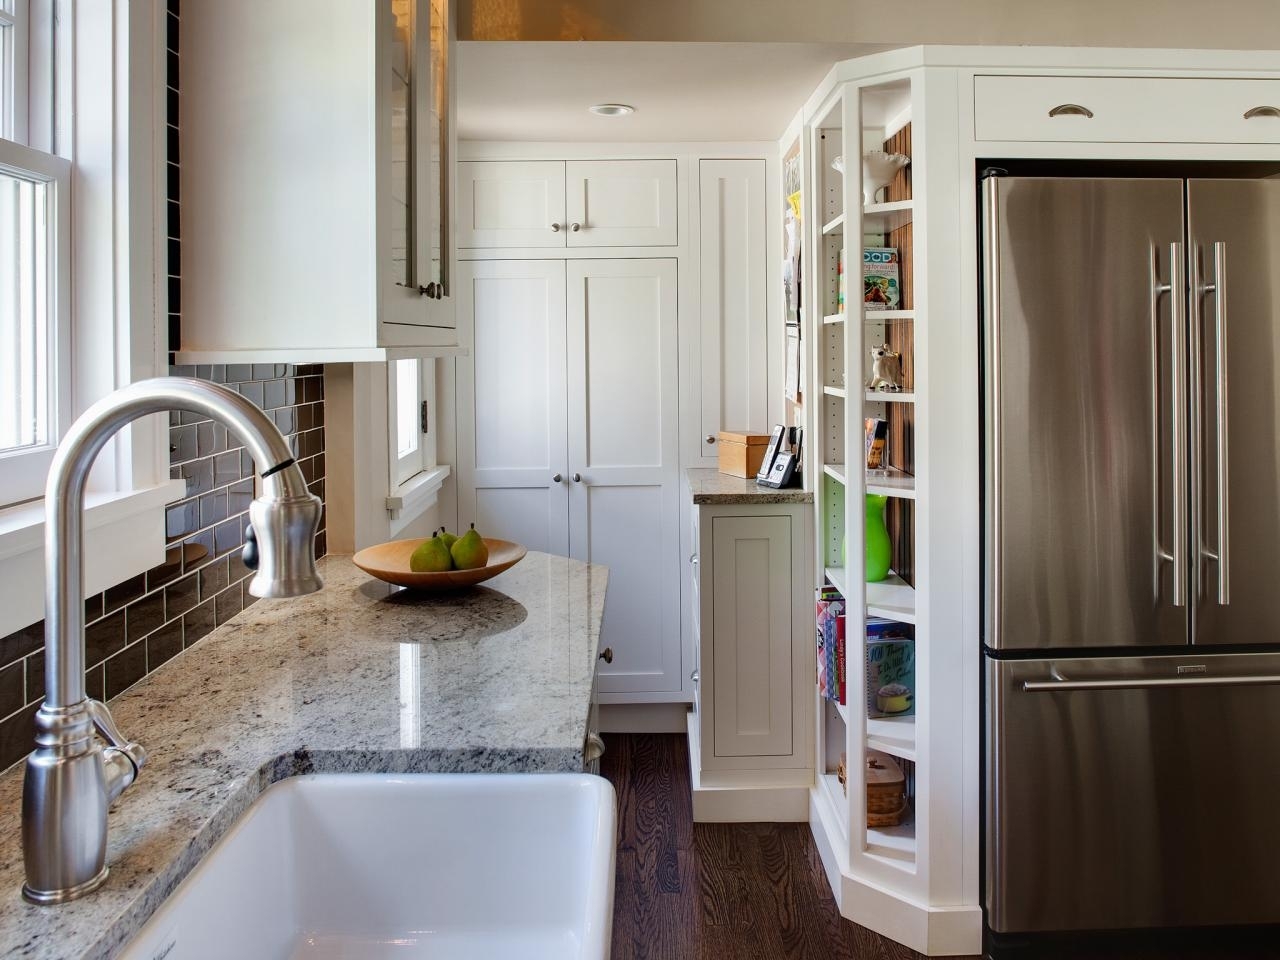 Kitchen Remodel Ideas For Small Spaces